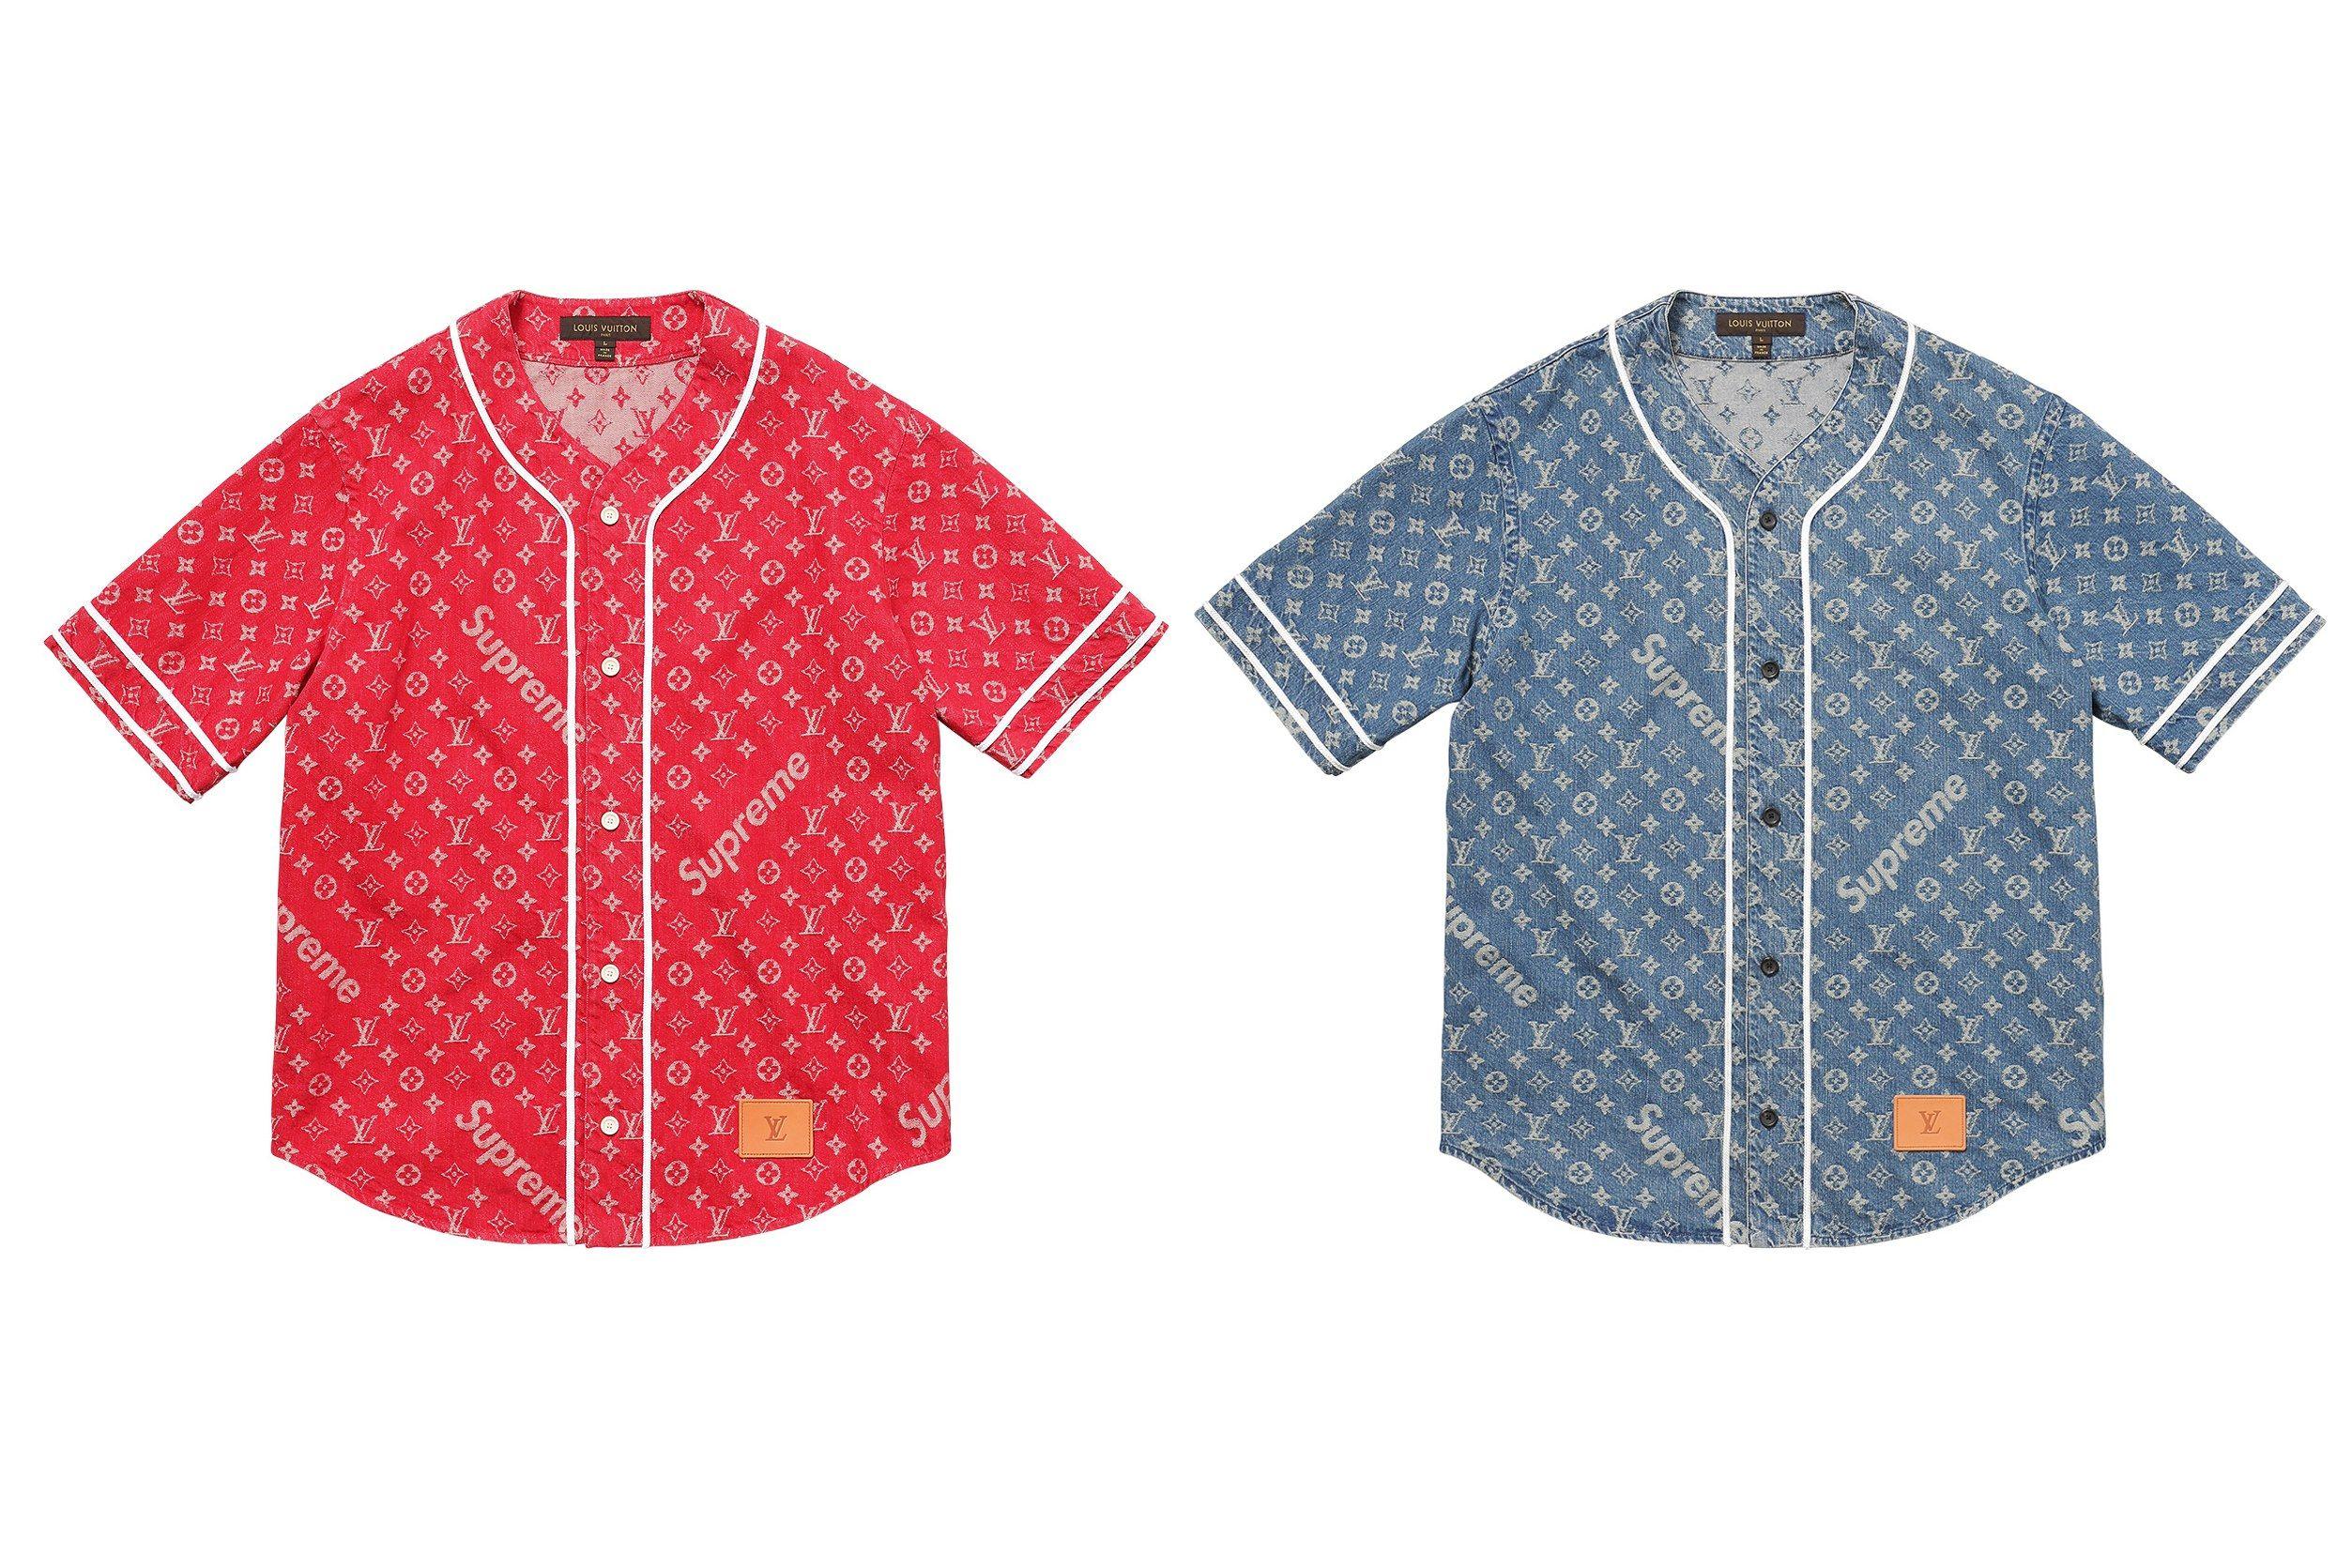 LV X Supreme Collab Logo - Supreme X Louis Vuitton: See Every Piece From The Game Changing